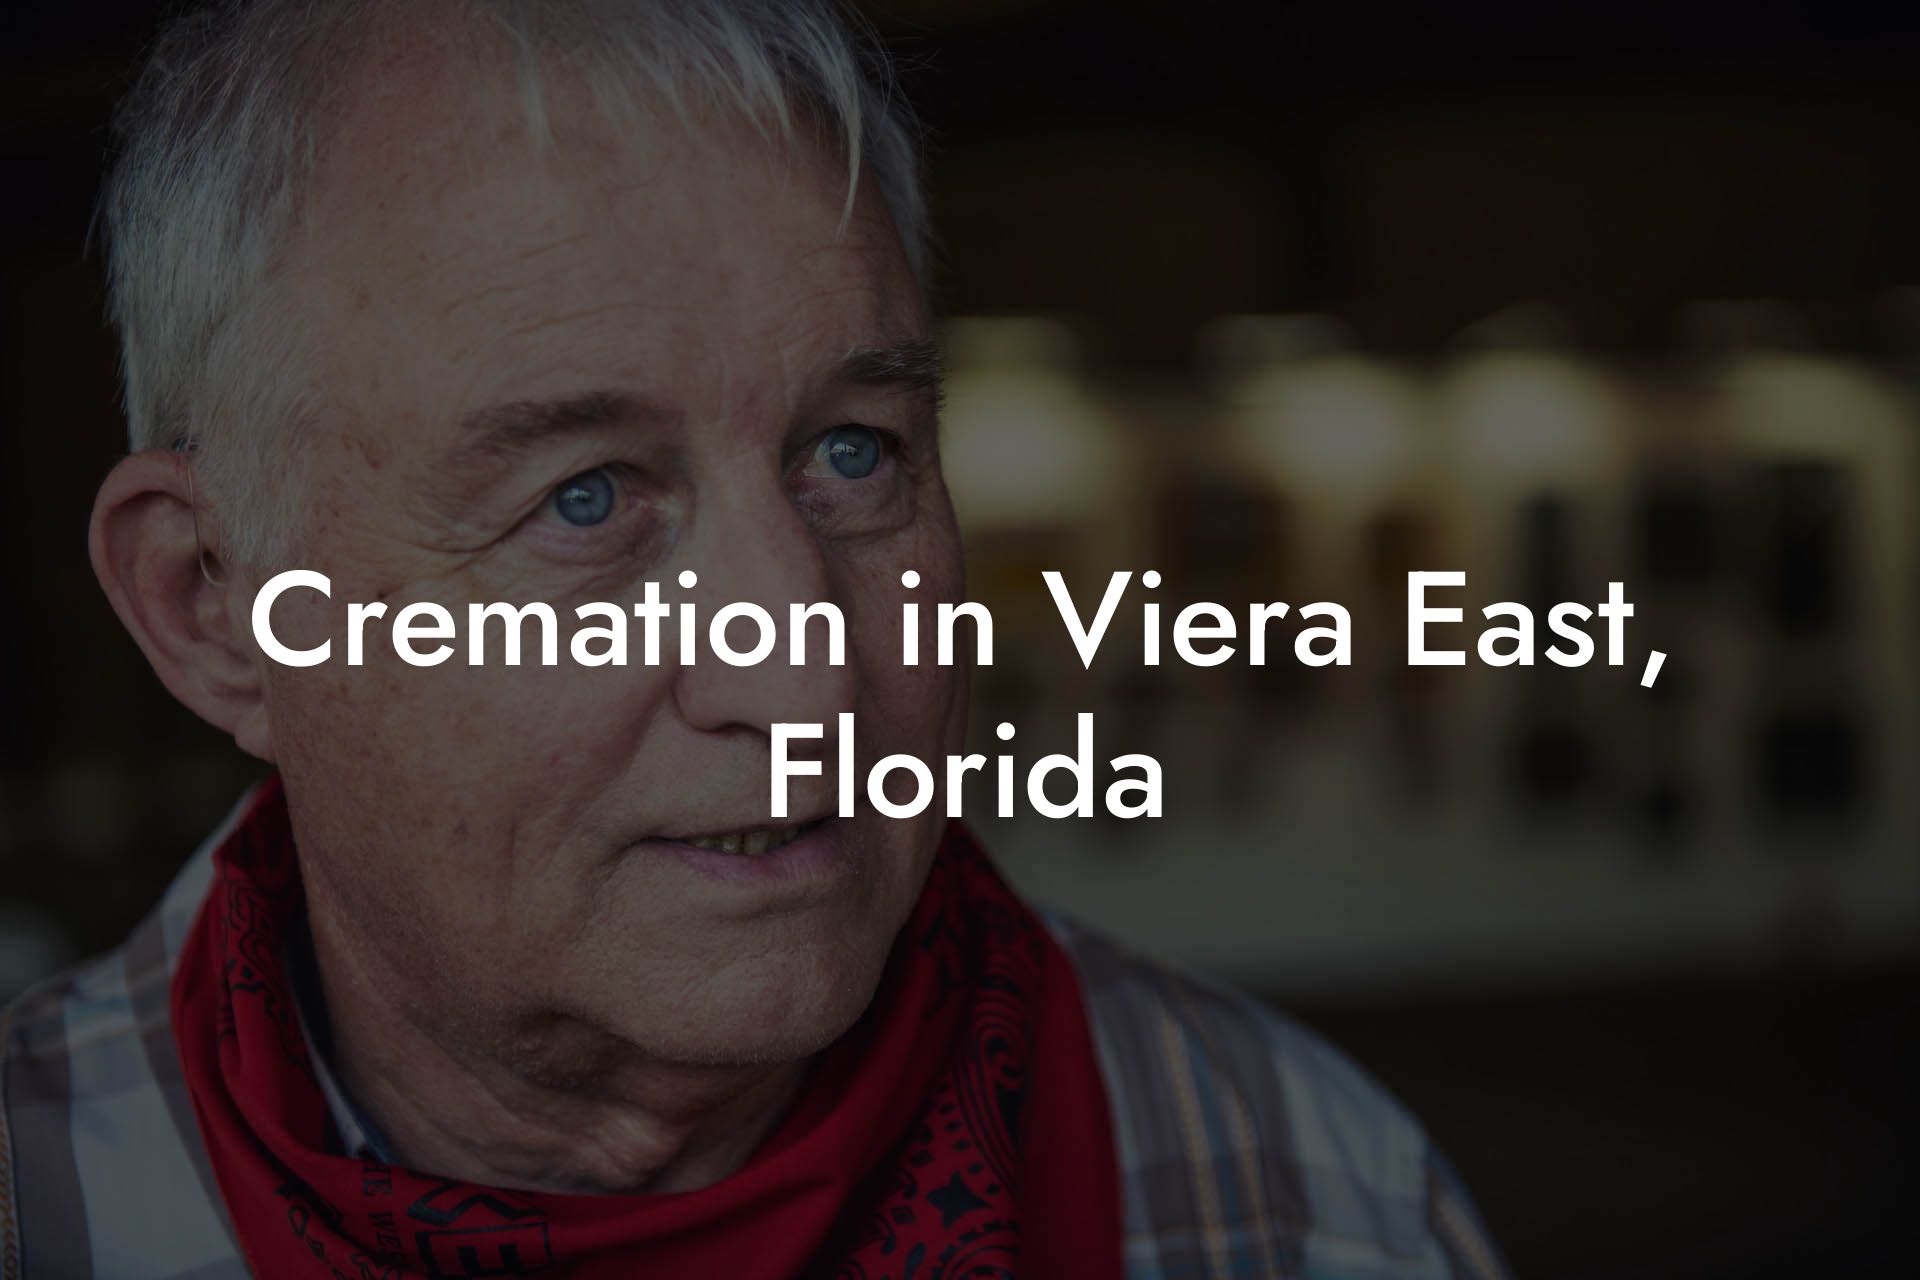 Cremation in Viera East, Florida